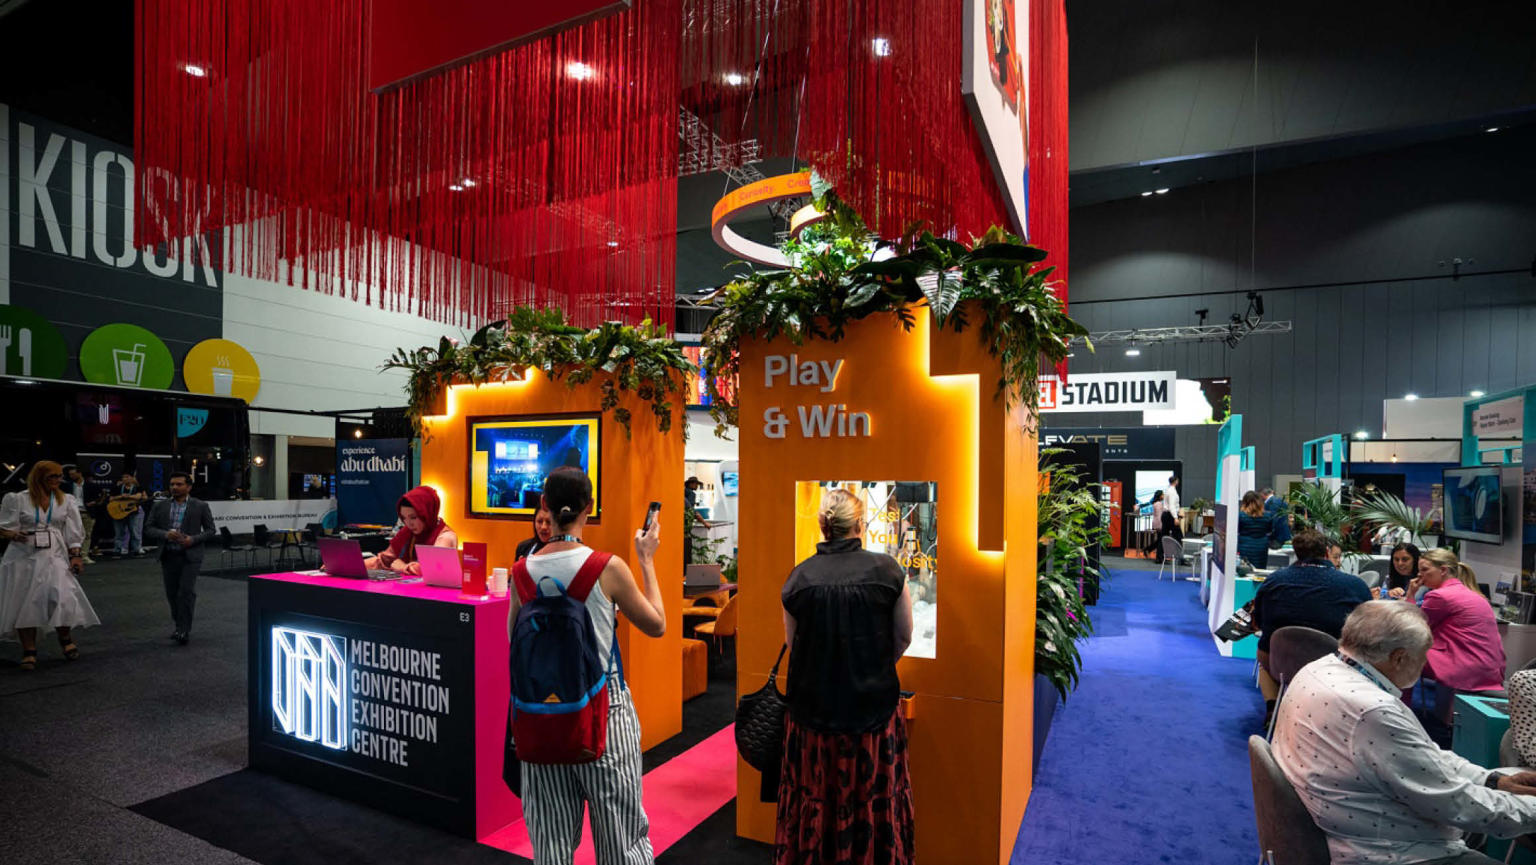 An attention-grabbing exhibition stand with a dynamic arrangement of elements: long red fringing hanging from the ceiling, a vibrant orange wall featuring a walk-through cutout. On the left side, a pink and black table proudly displays a neon logo reading 'Melbourne Convention and Exhibition Centre.' To the right, a captivating claw drop game beckons with the enticing words 'Play & Win' above it. Excited individuals are gathered around the stand, adding to the lively atmosphere.